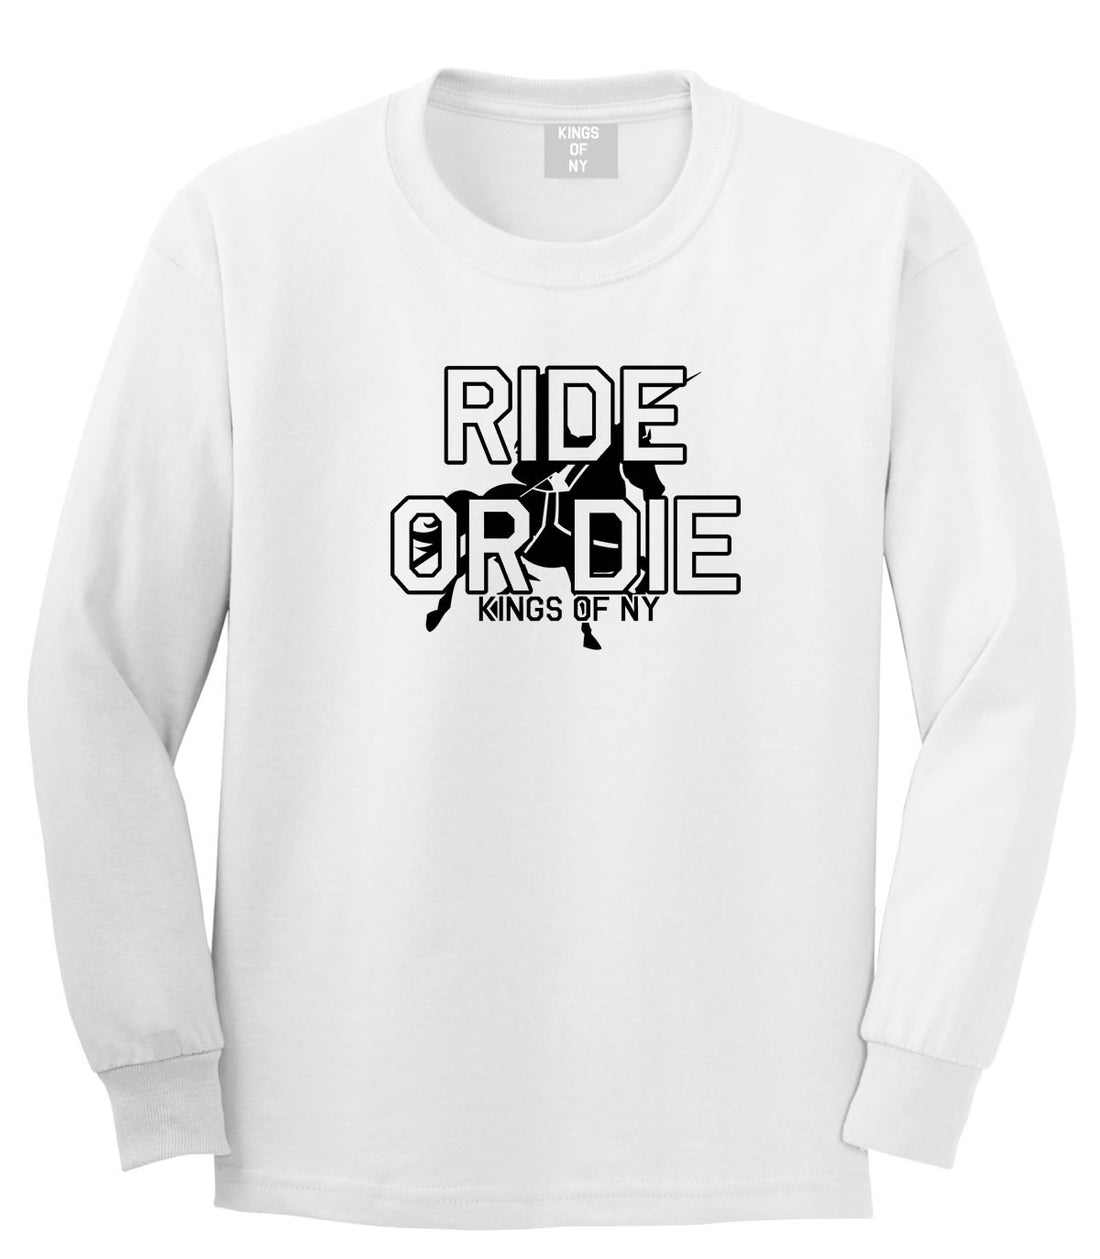 Ride Or Die Horse Rider Long Sleeve T-Shirt in White by Kings Of NY